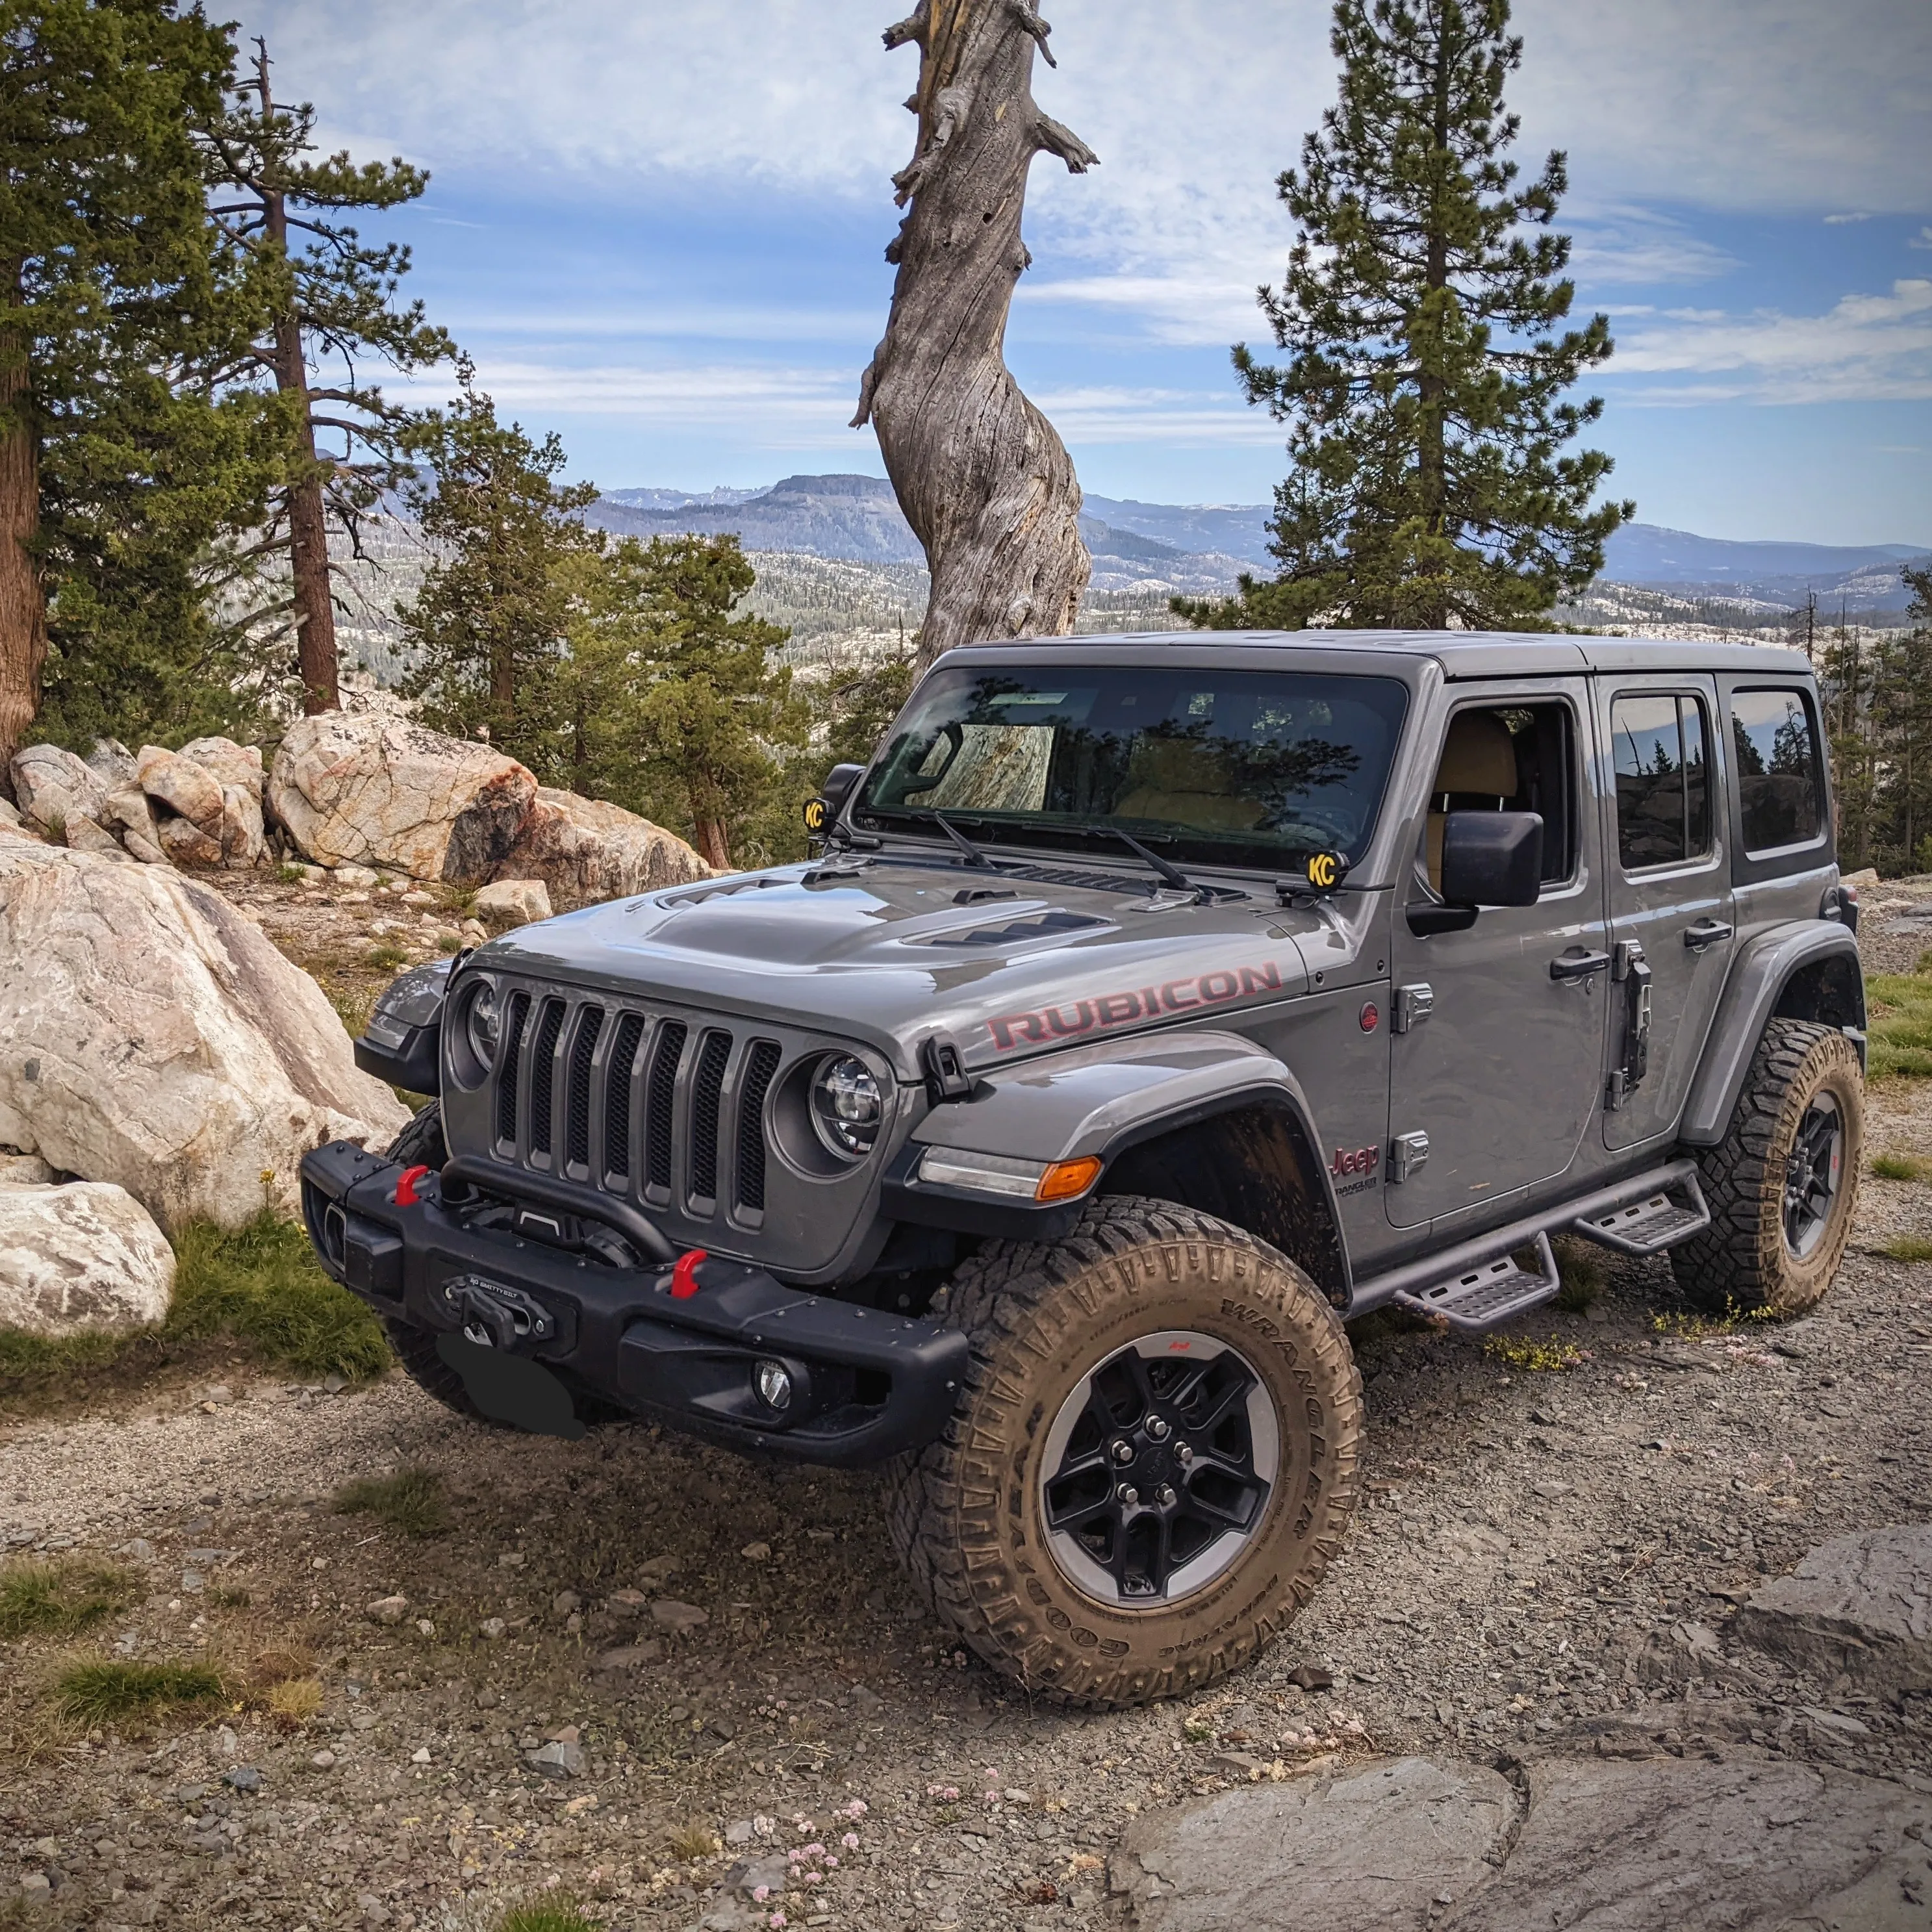 Jeep ready for an epic camping trip